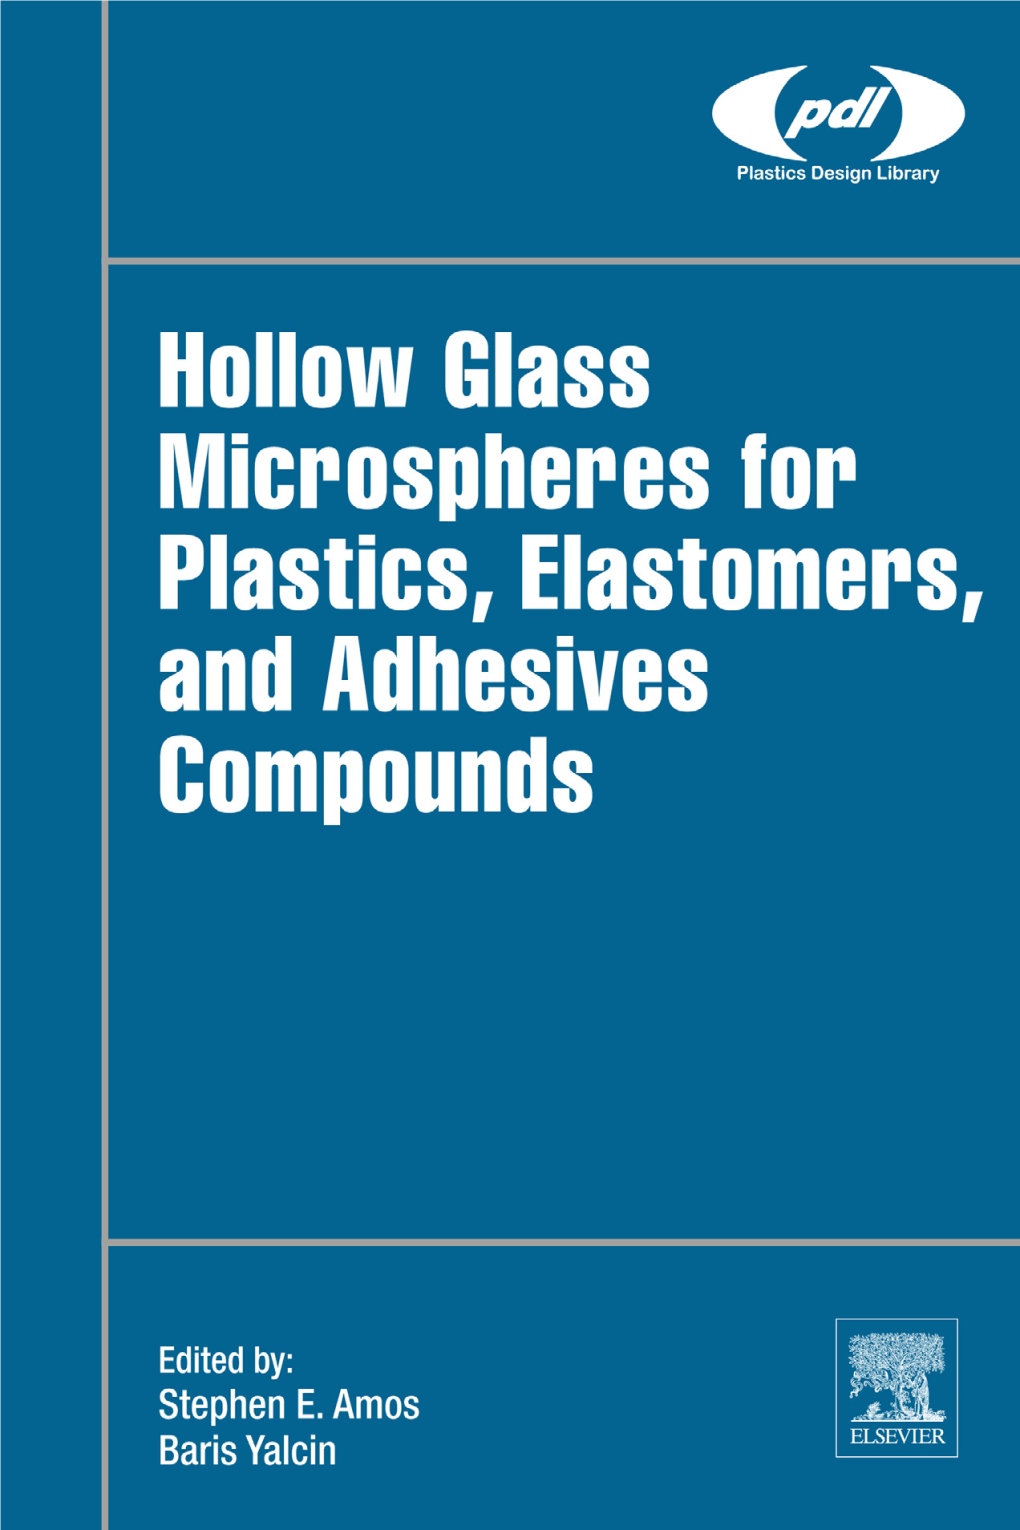 Hollow Glass Microspheres for Plastics, Elastomers, and Adhesives Compounds Copyright © 2015 Elsevier Inc